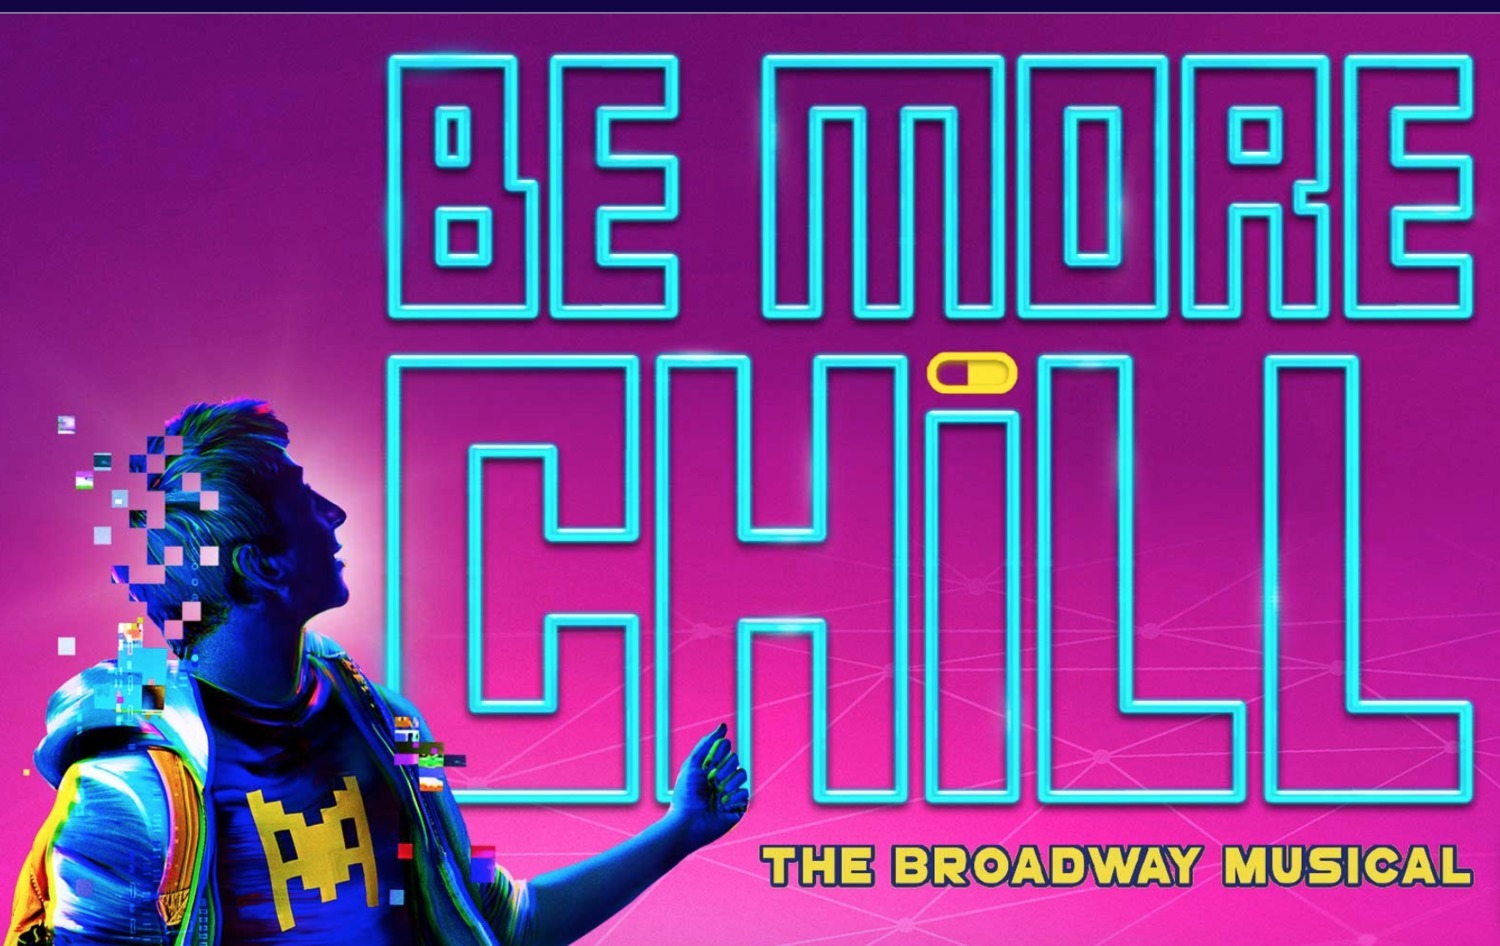 Be More Chill 2 tix